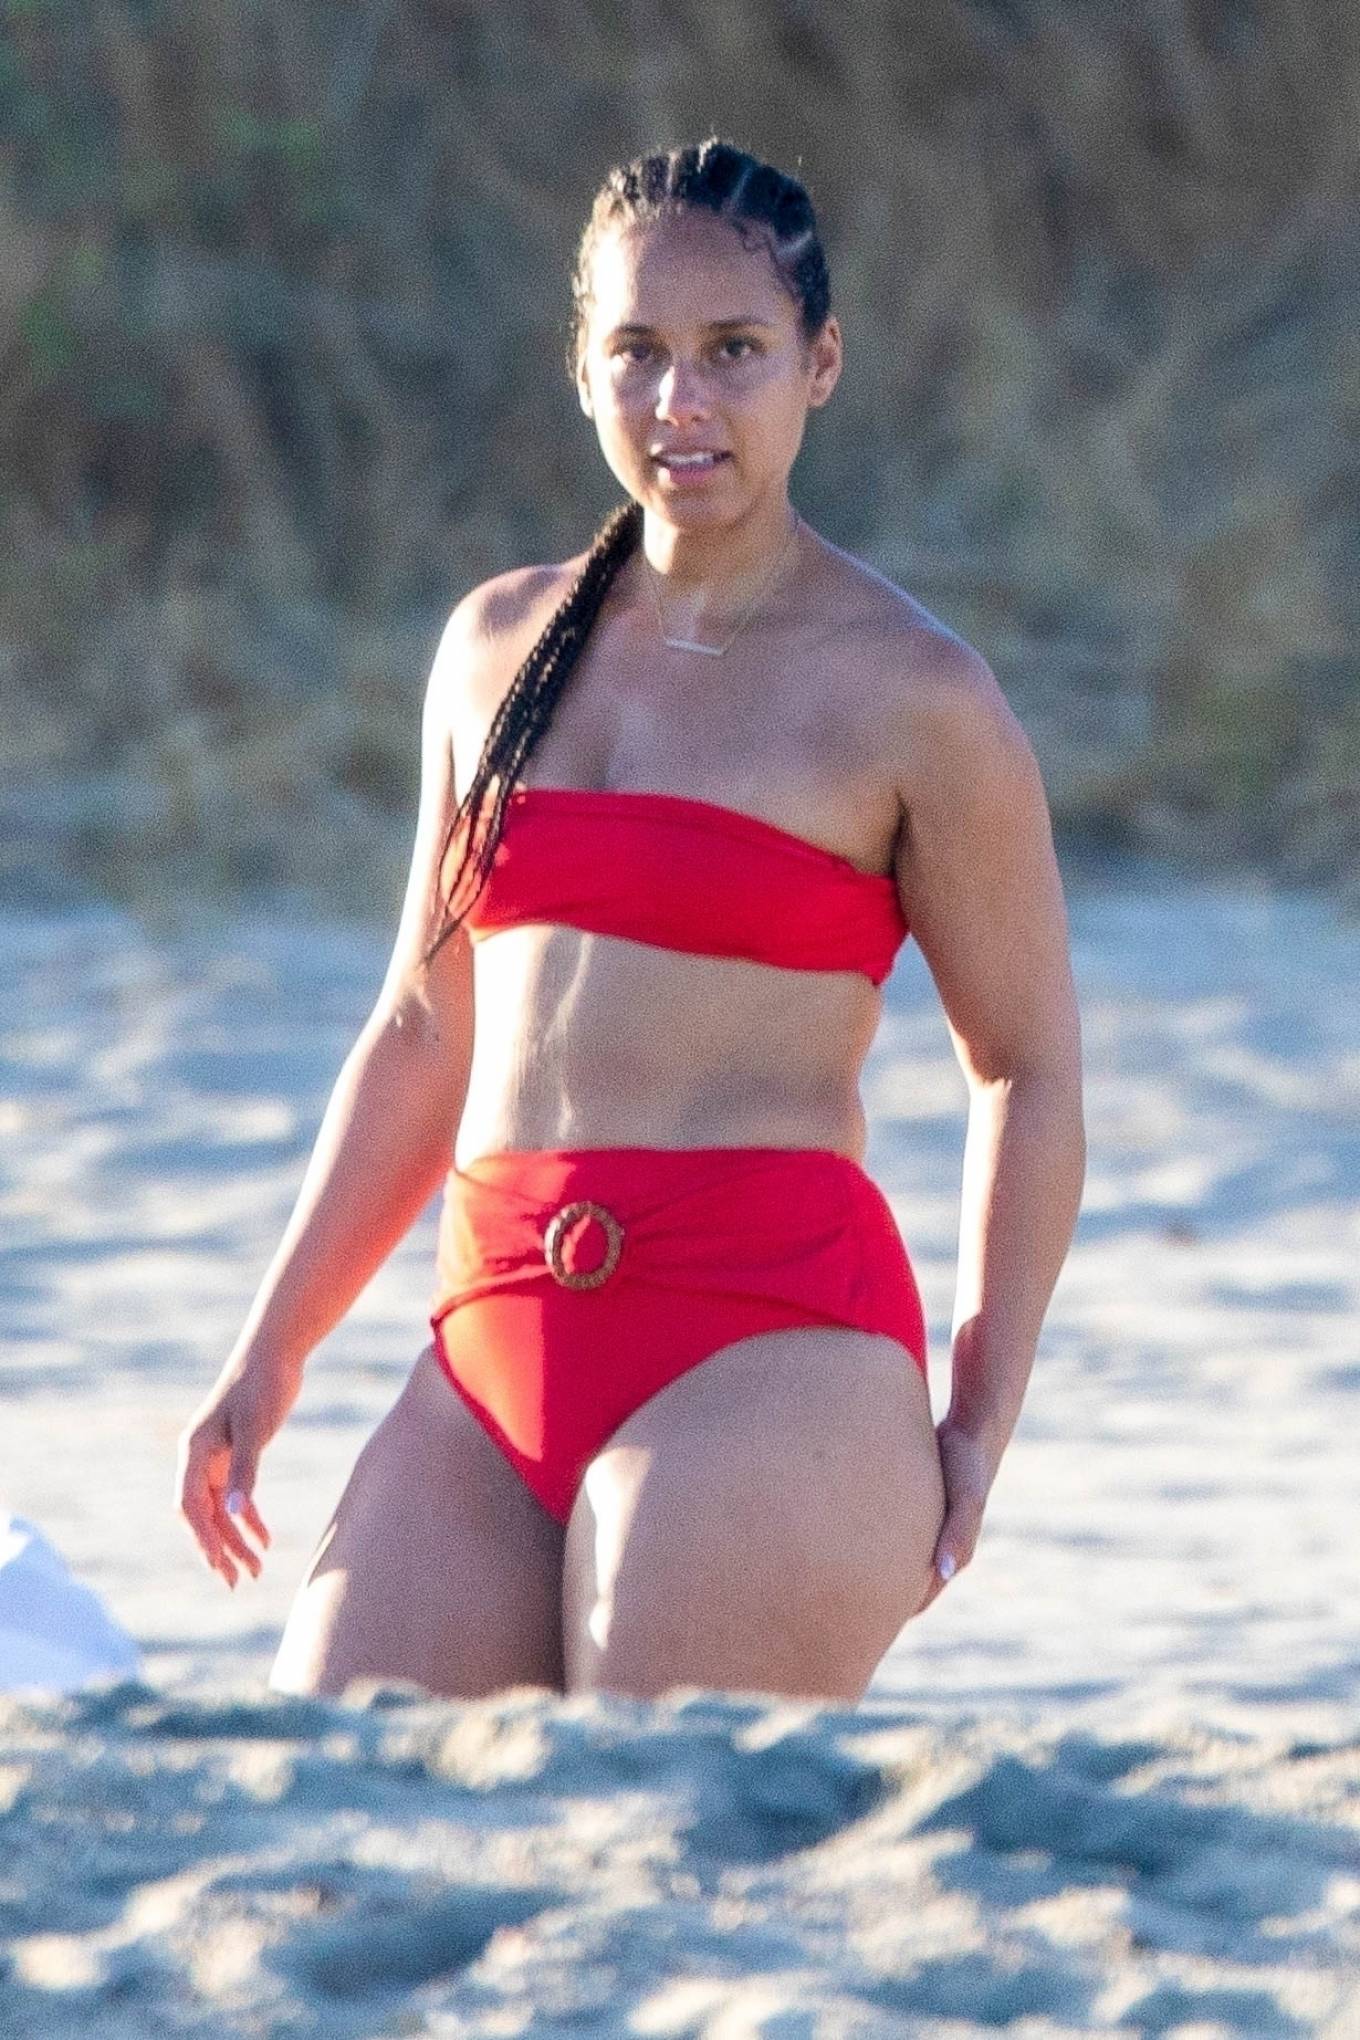 Alicia Keys - Spotted on a beach in Cabo San Lucas